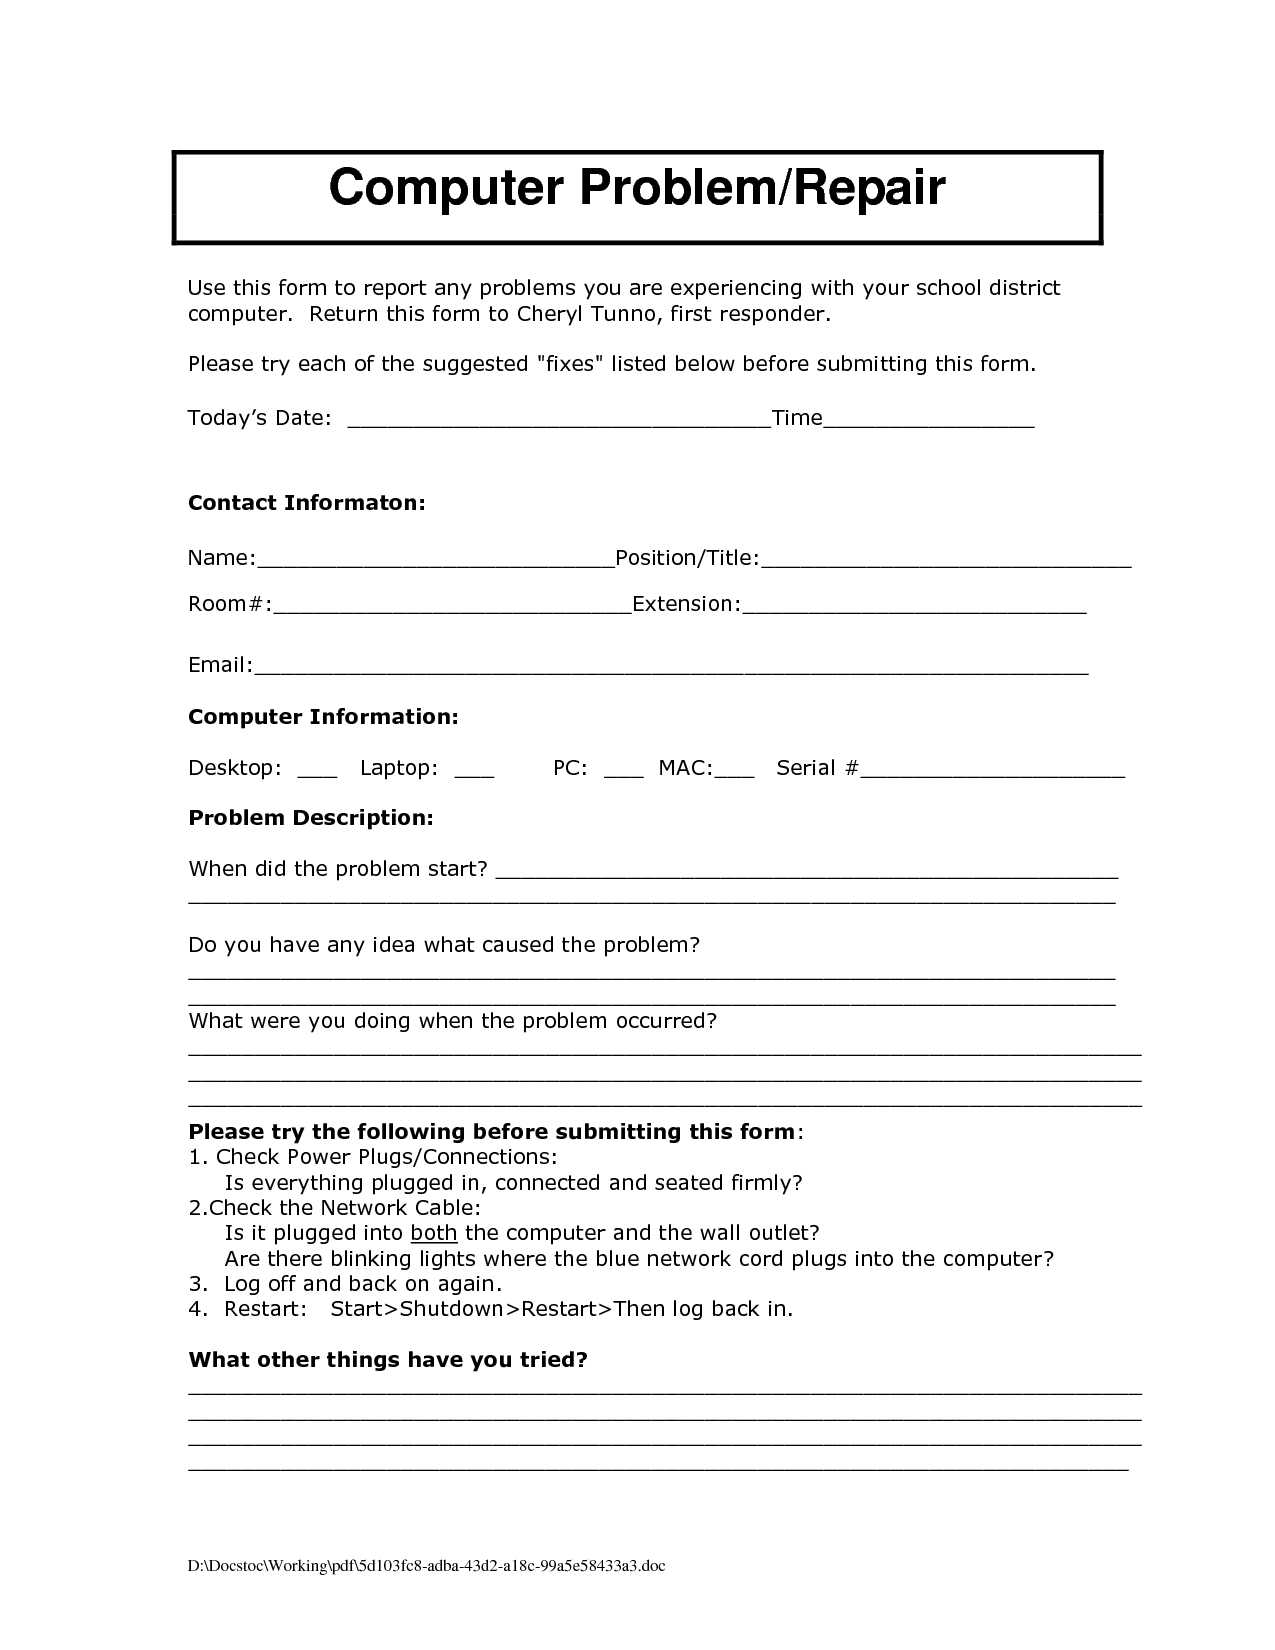 Maintenance Report Form Template Daily Format In Excel Throughout Computer Maintenance Report Template